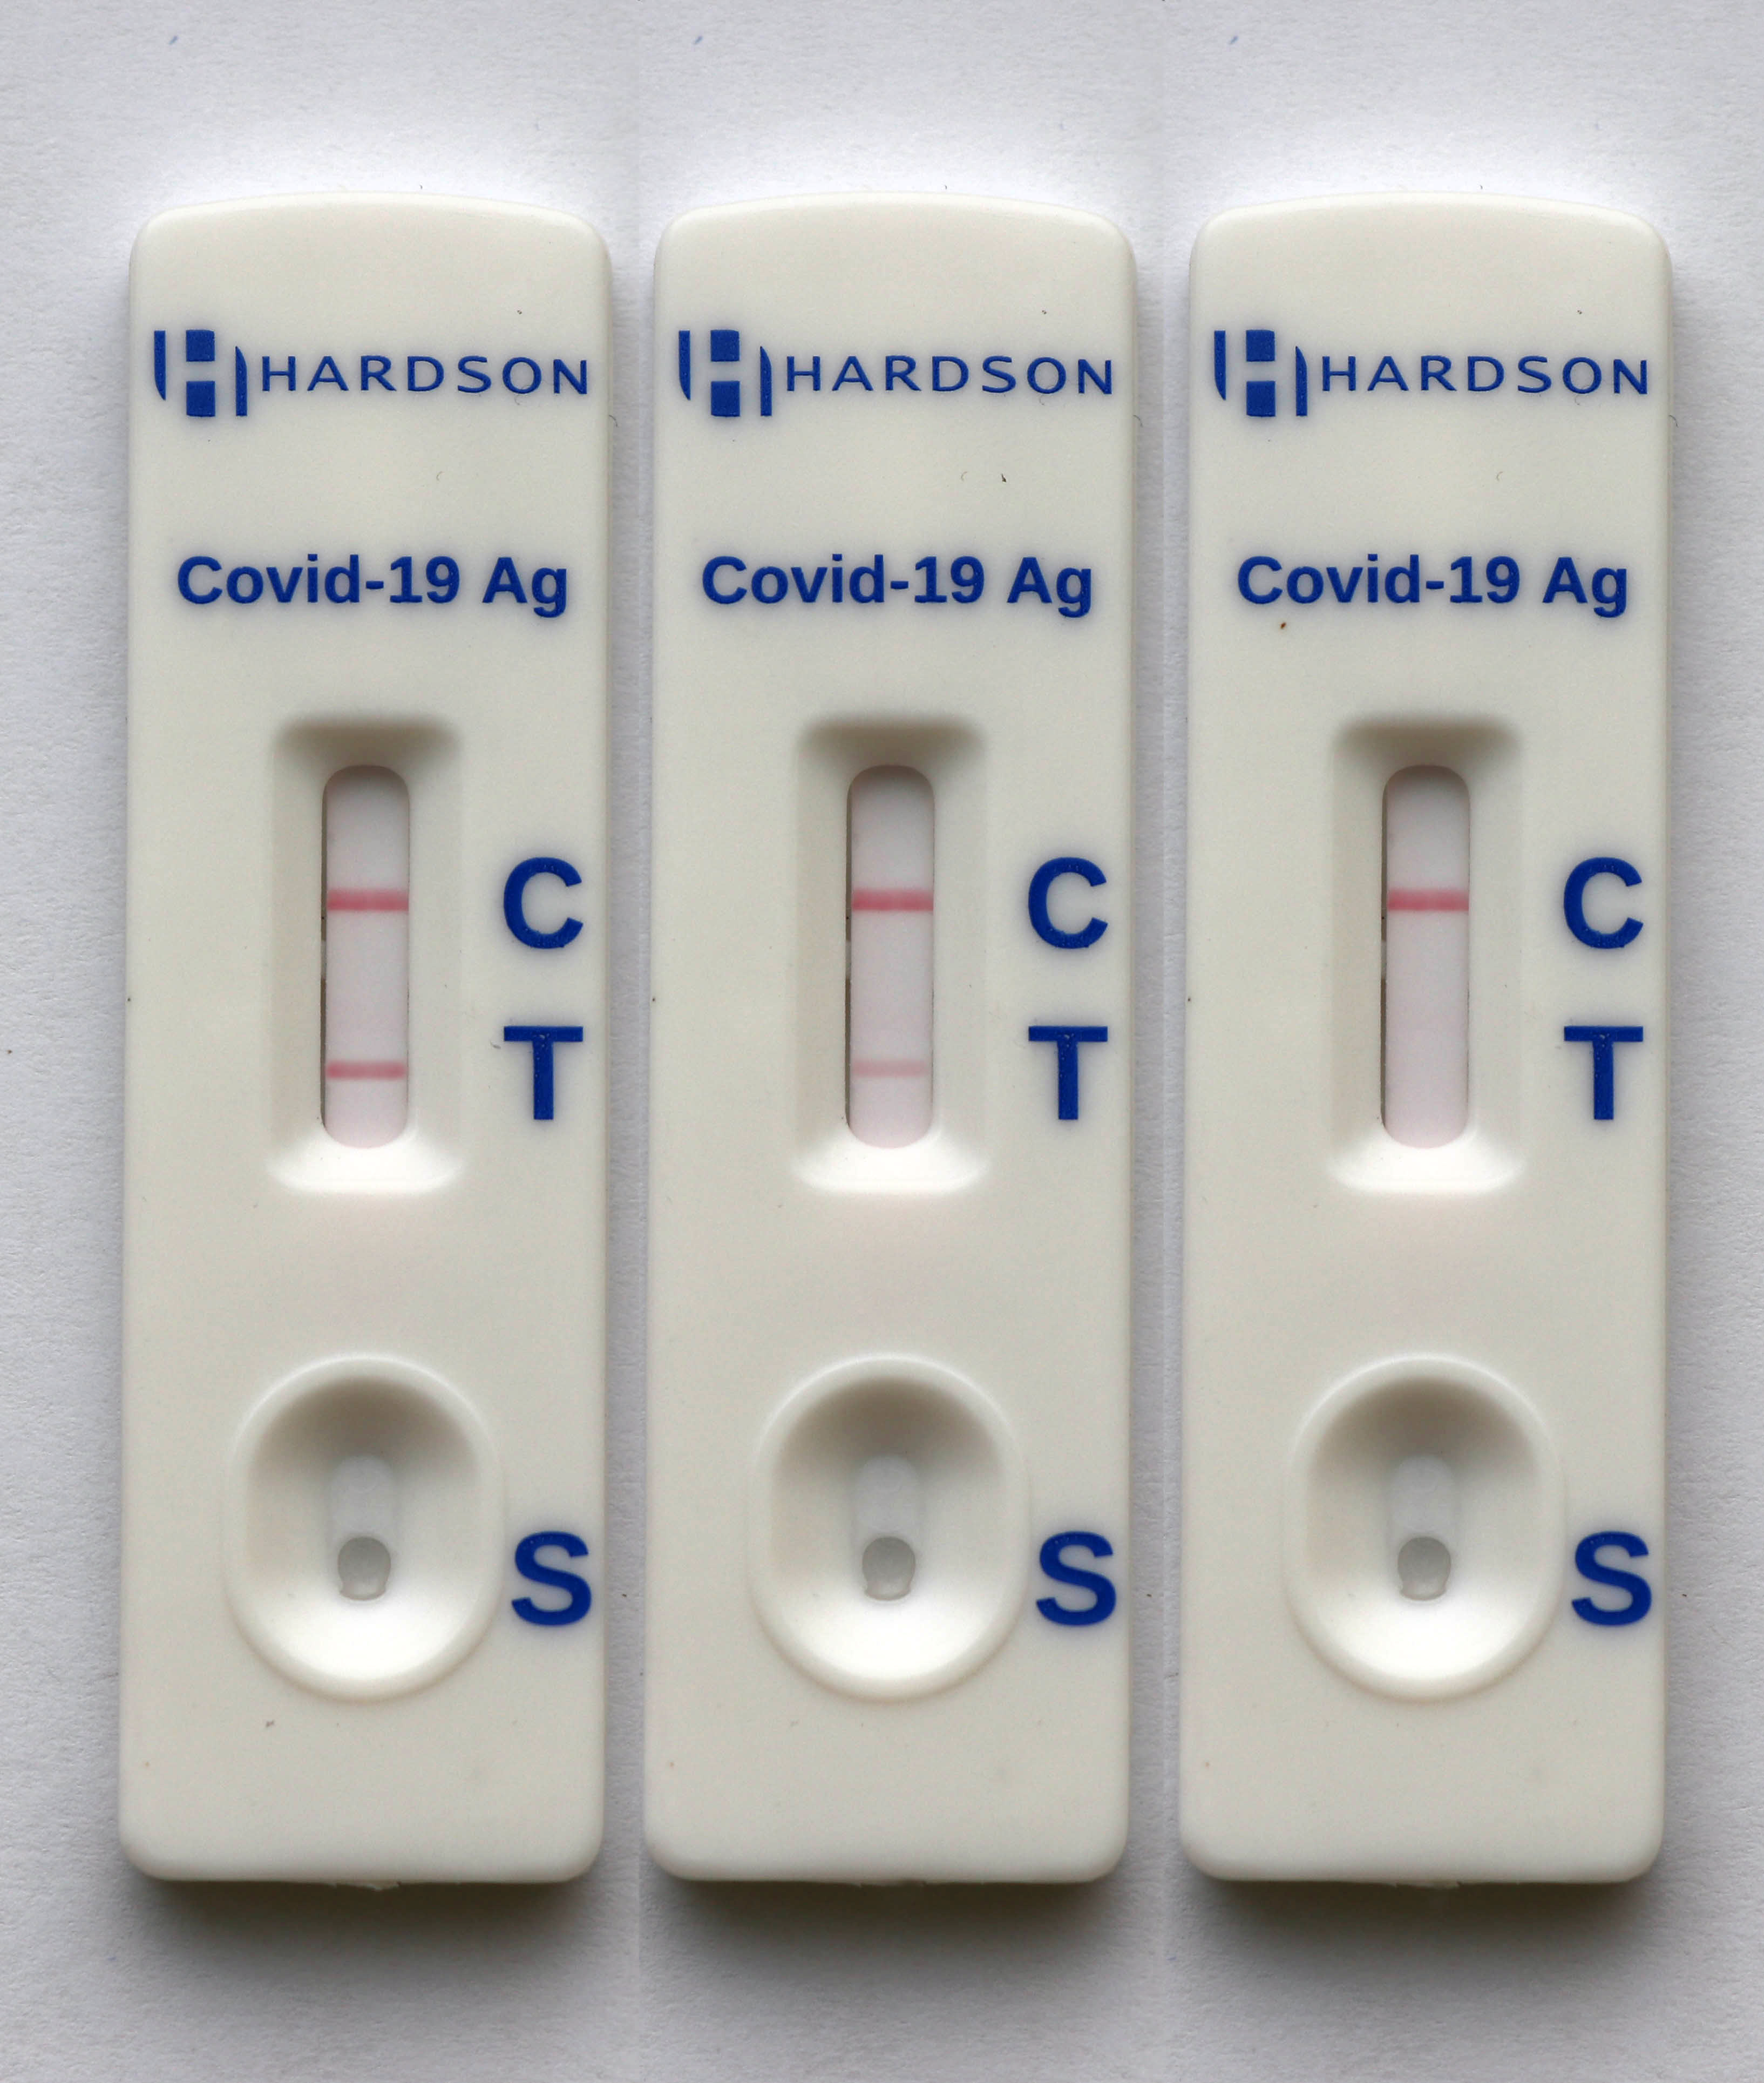 Clinical Evaluation of Commercial HARDSON COVID-19 Antigen Rapid Test Kit for Routine COVID-19 Diagnosis